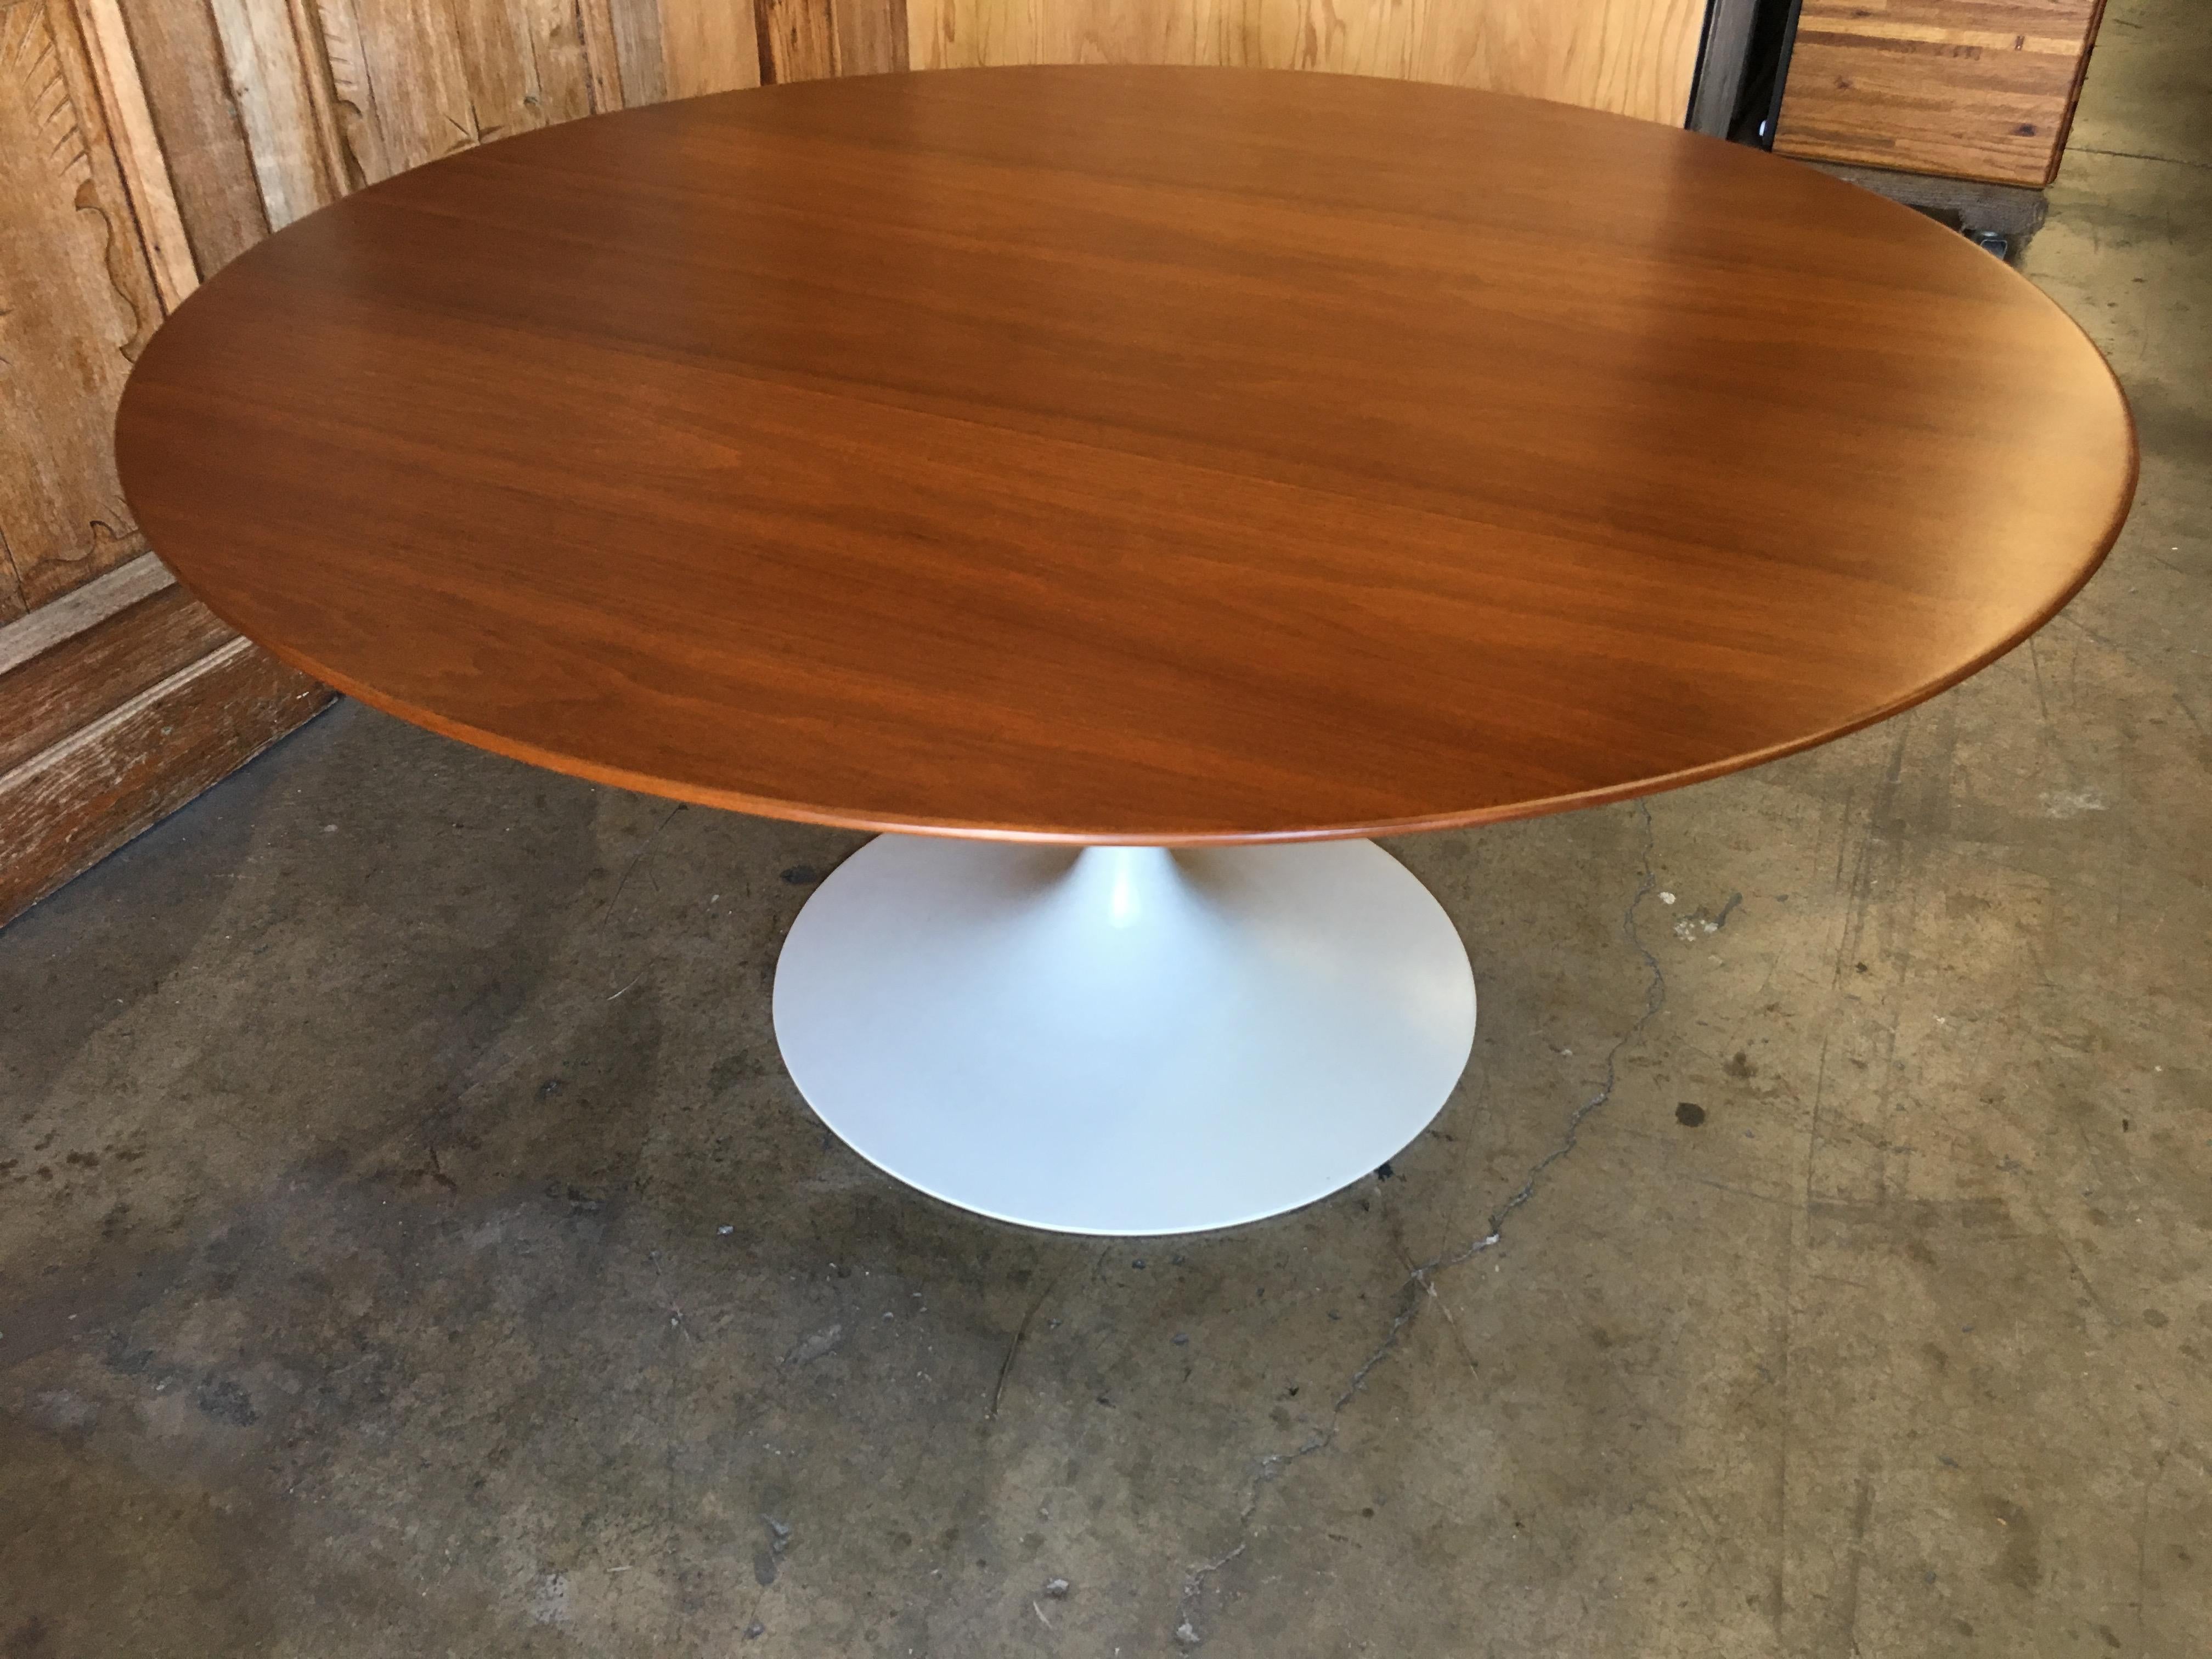 Walnut topped dining table with beveled edge and off white metal base.